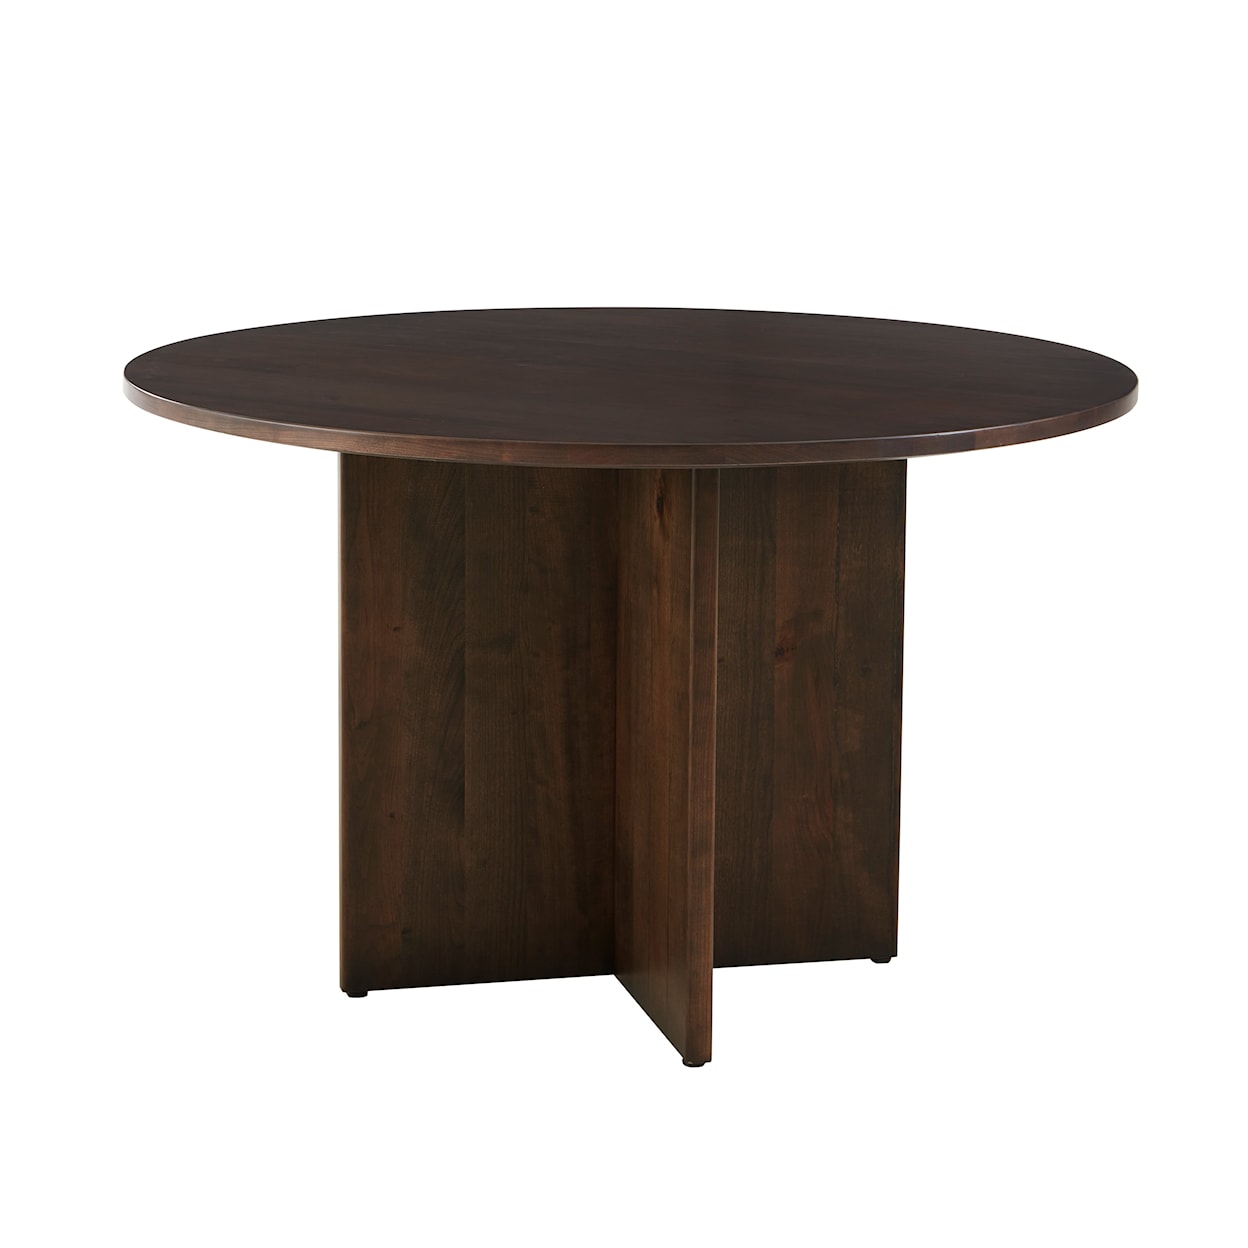 Artisan & Post Crafted Cherry Round Dining Table